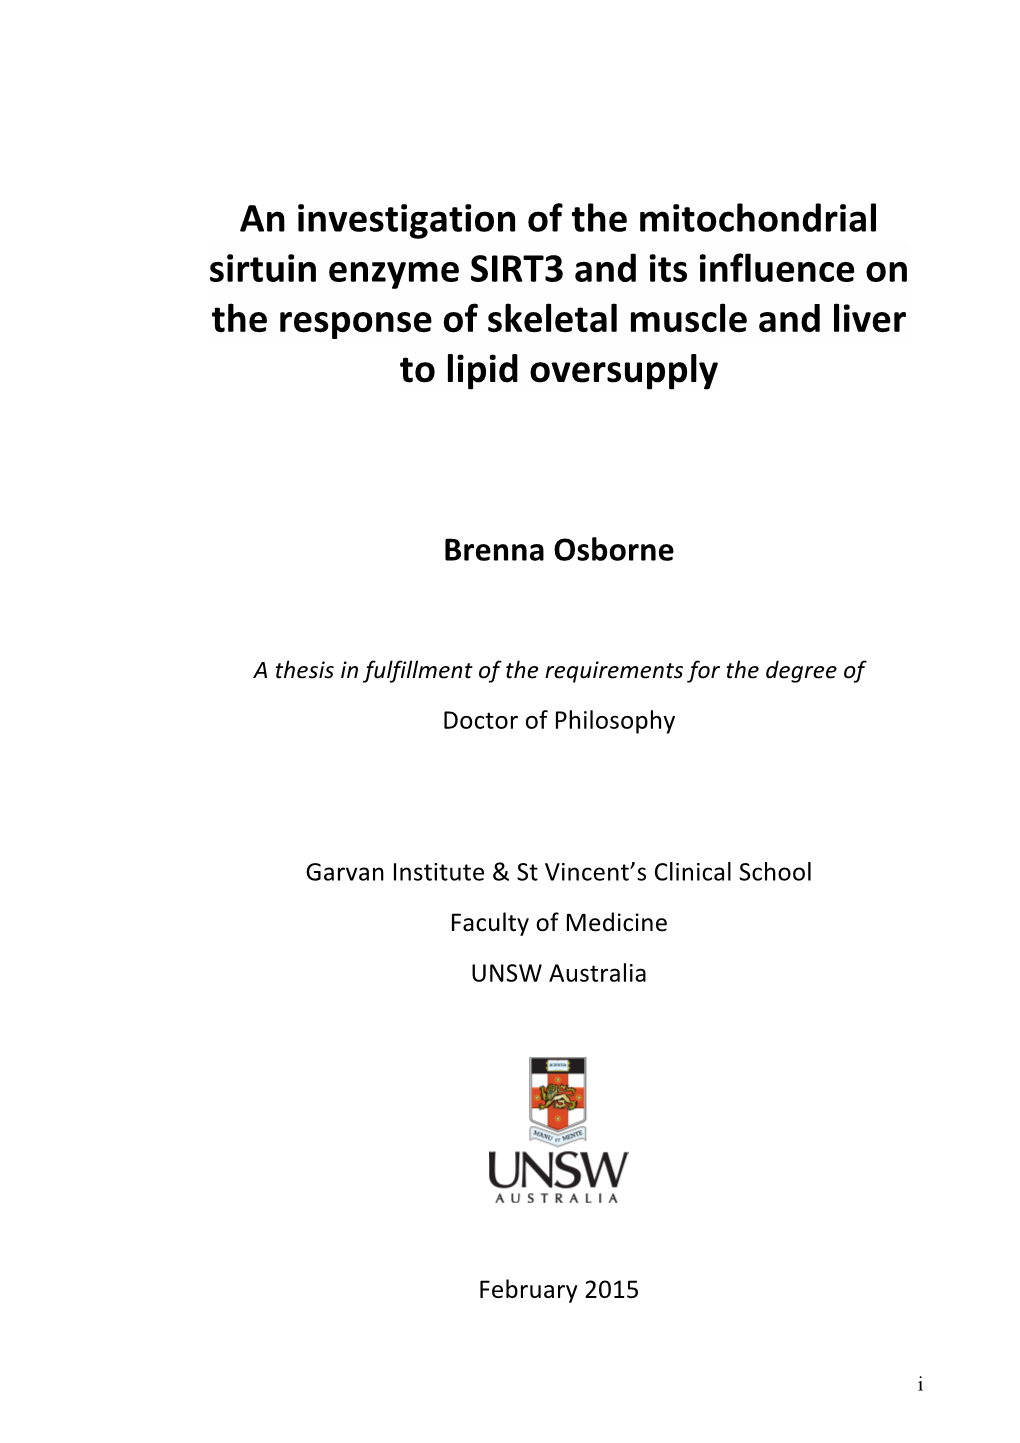 An Investigation of the Mitochondrial Sirtuin Enzyme SIRT3 and Its Influence on the Response of Skeletal Muscle and Liver to Lipid Oversupply